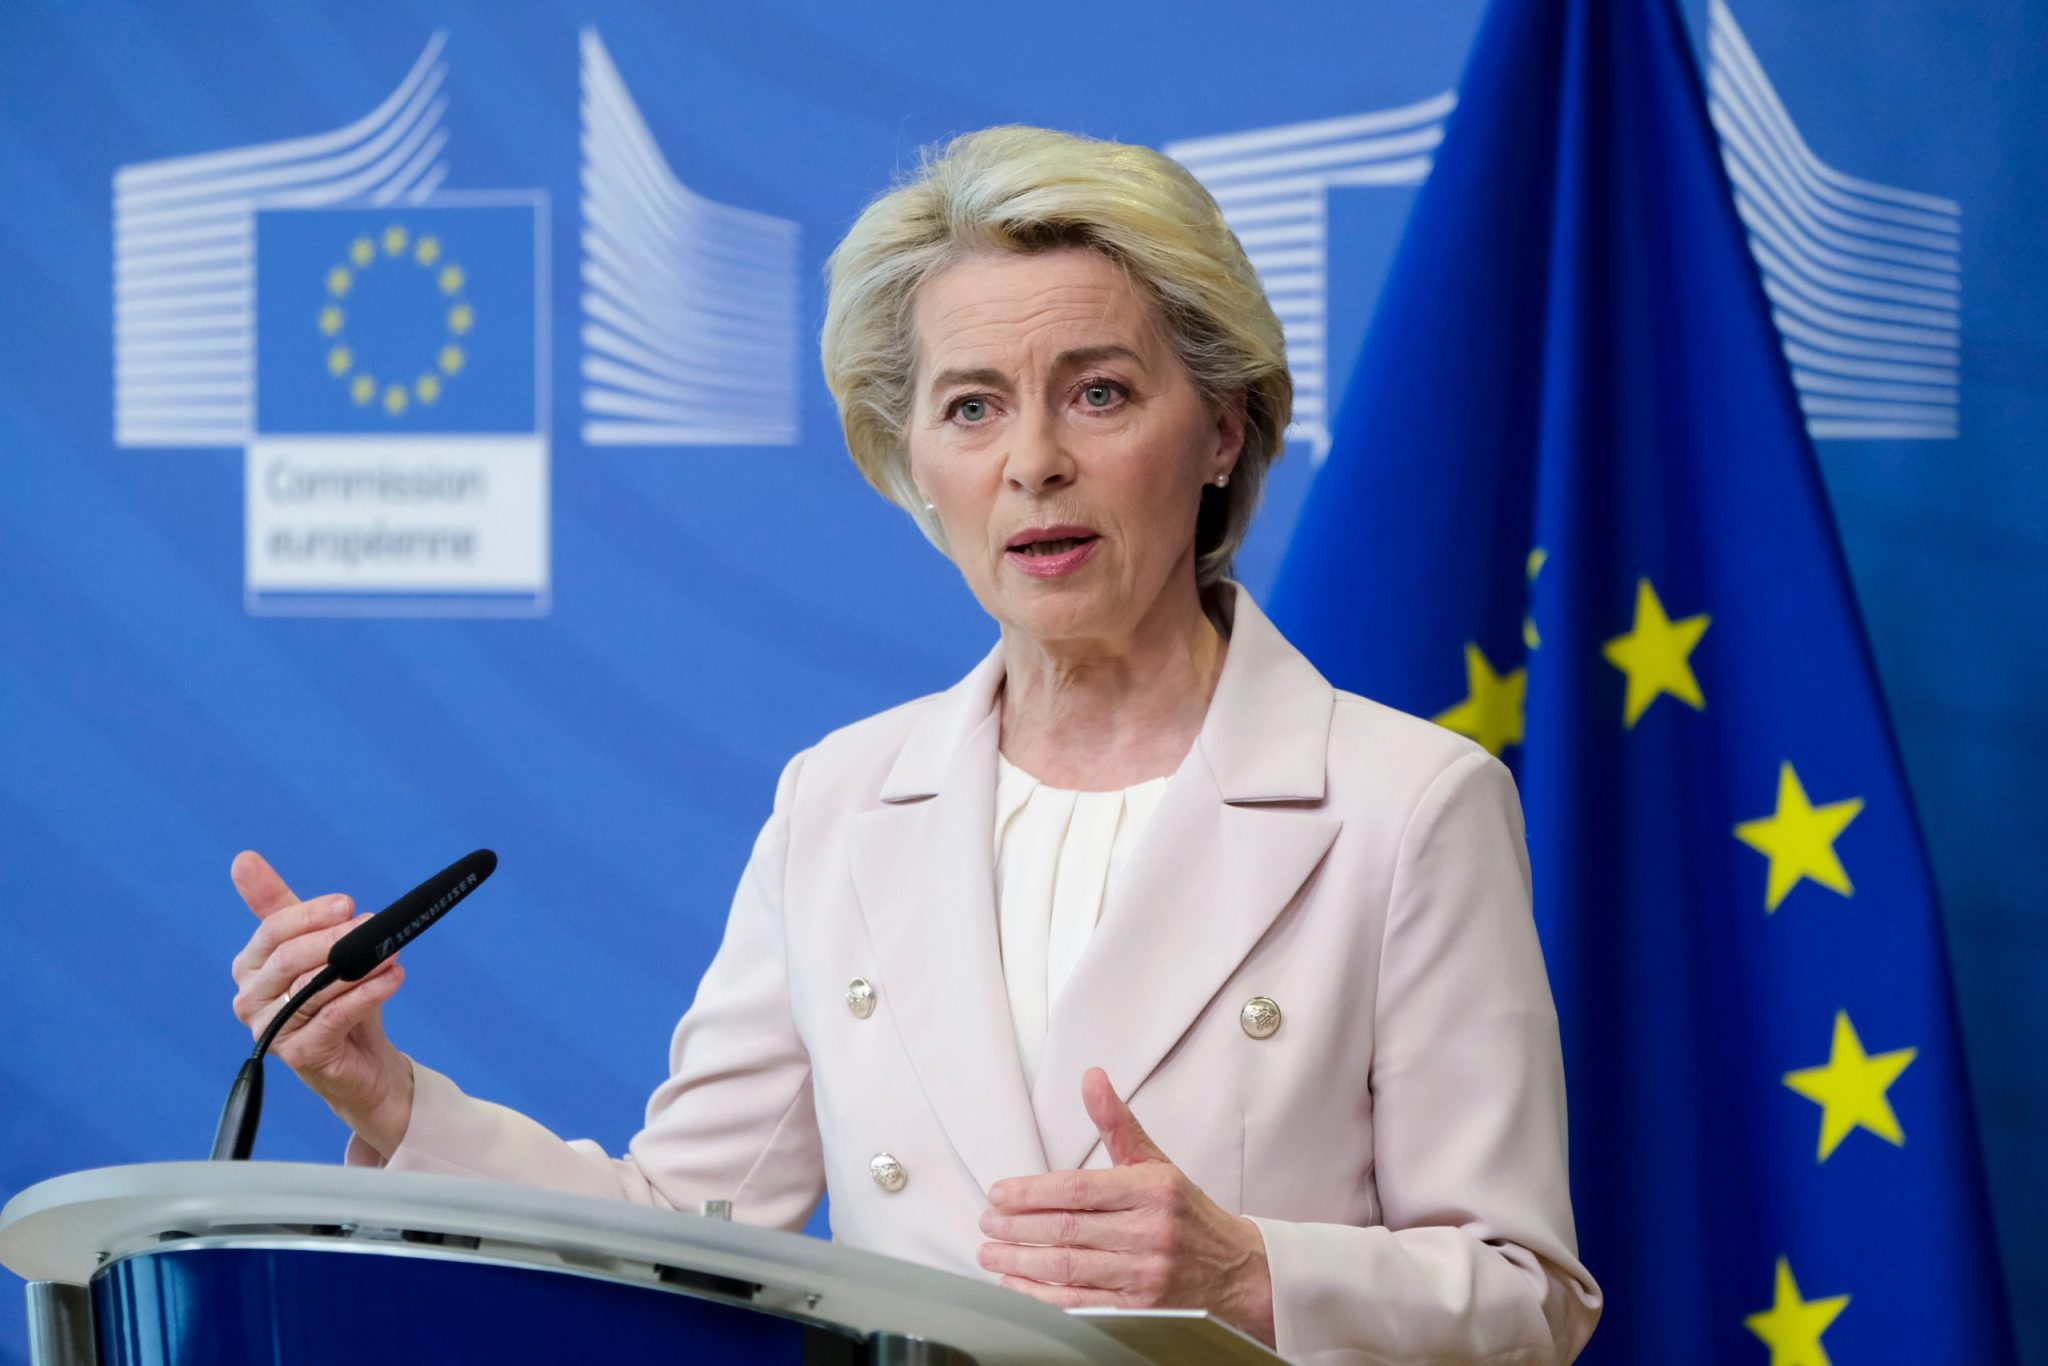 EU Commission President Ursula von der Leyen gives a presser following the announcement by Gazprom on the disruption of gas deliveries to certain EU Member States, in Brussels, Belgium, 27 April 2022